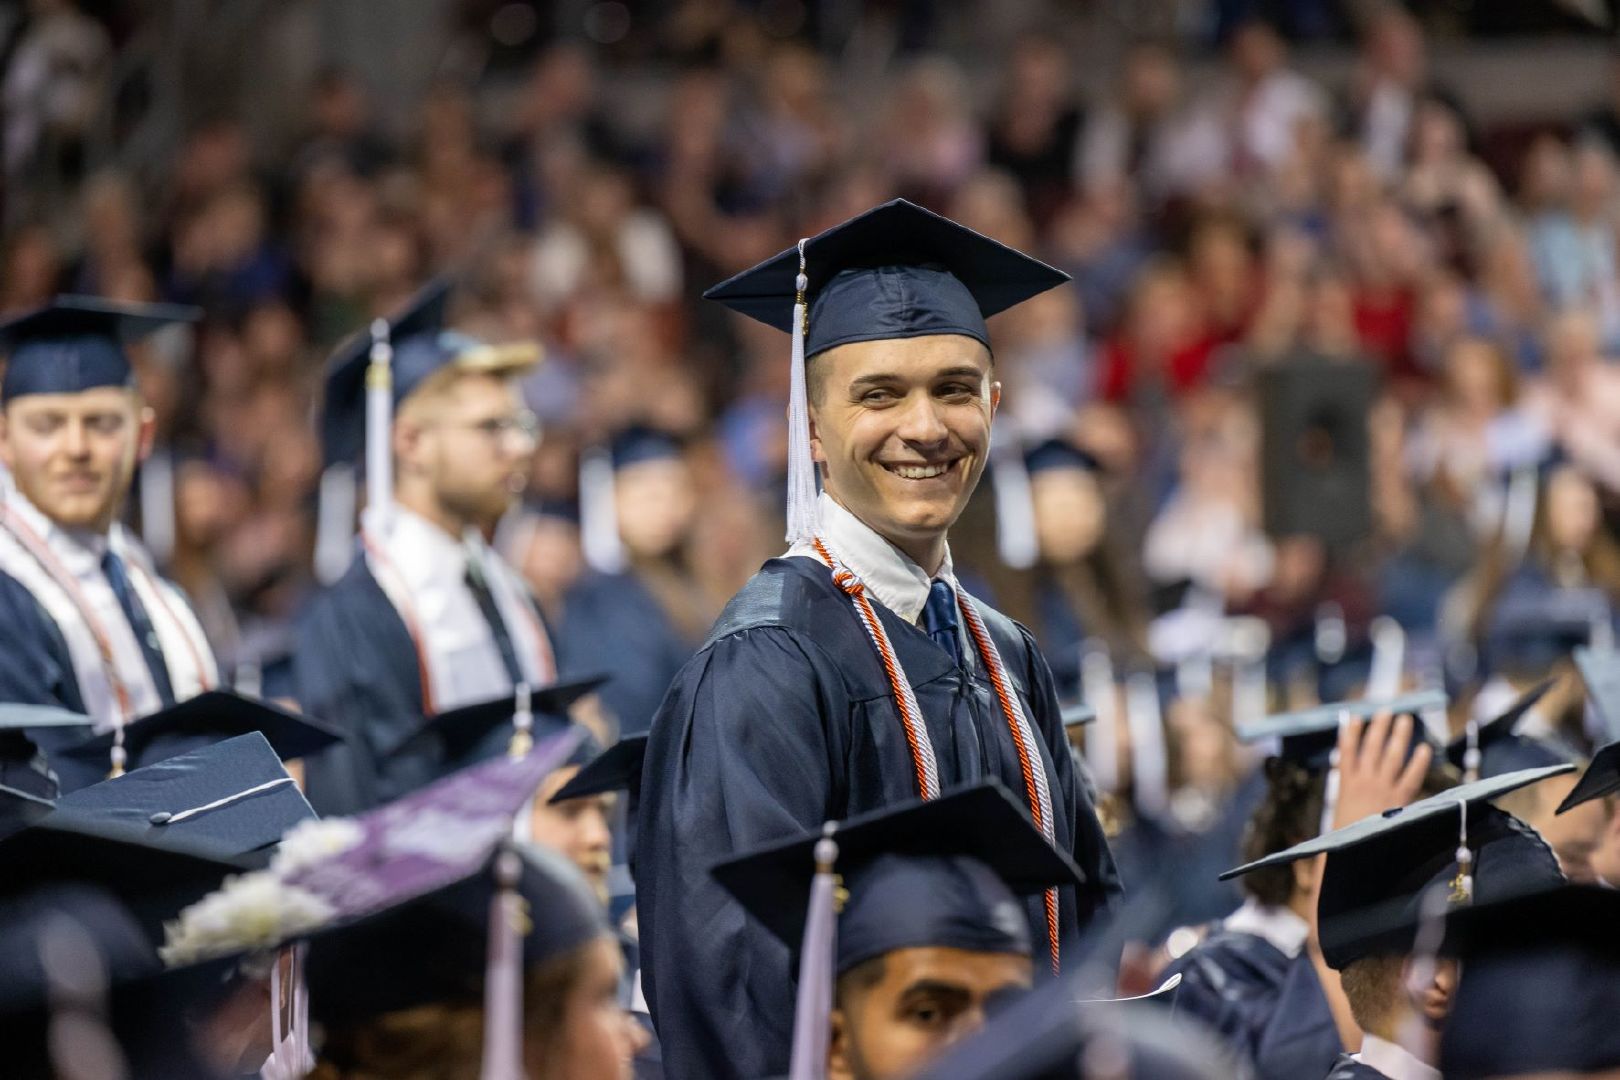 A student stands and smiles at Penn State Behrend's spring 2022 commencement program.